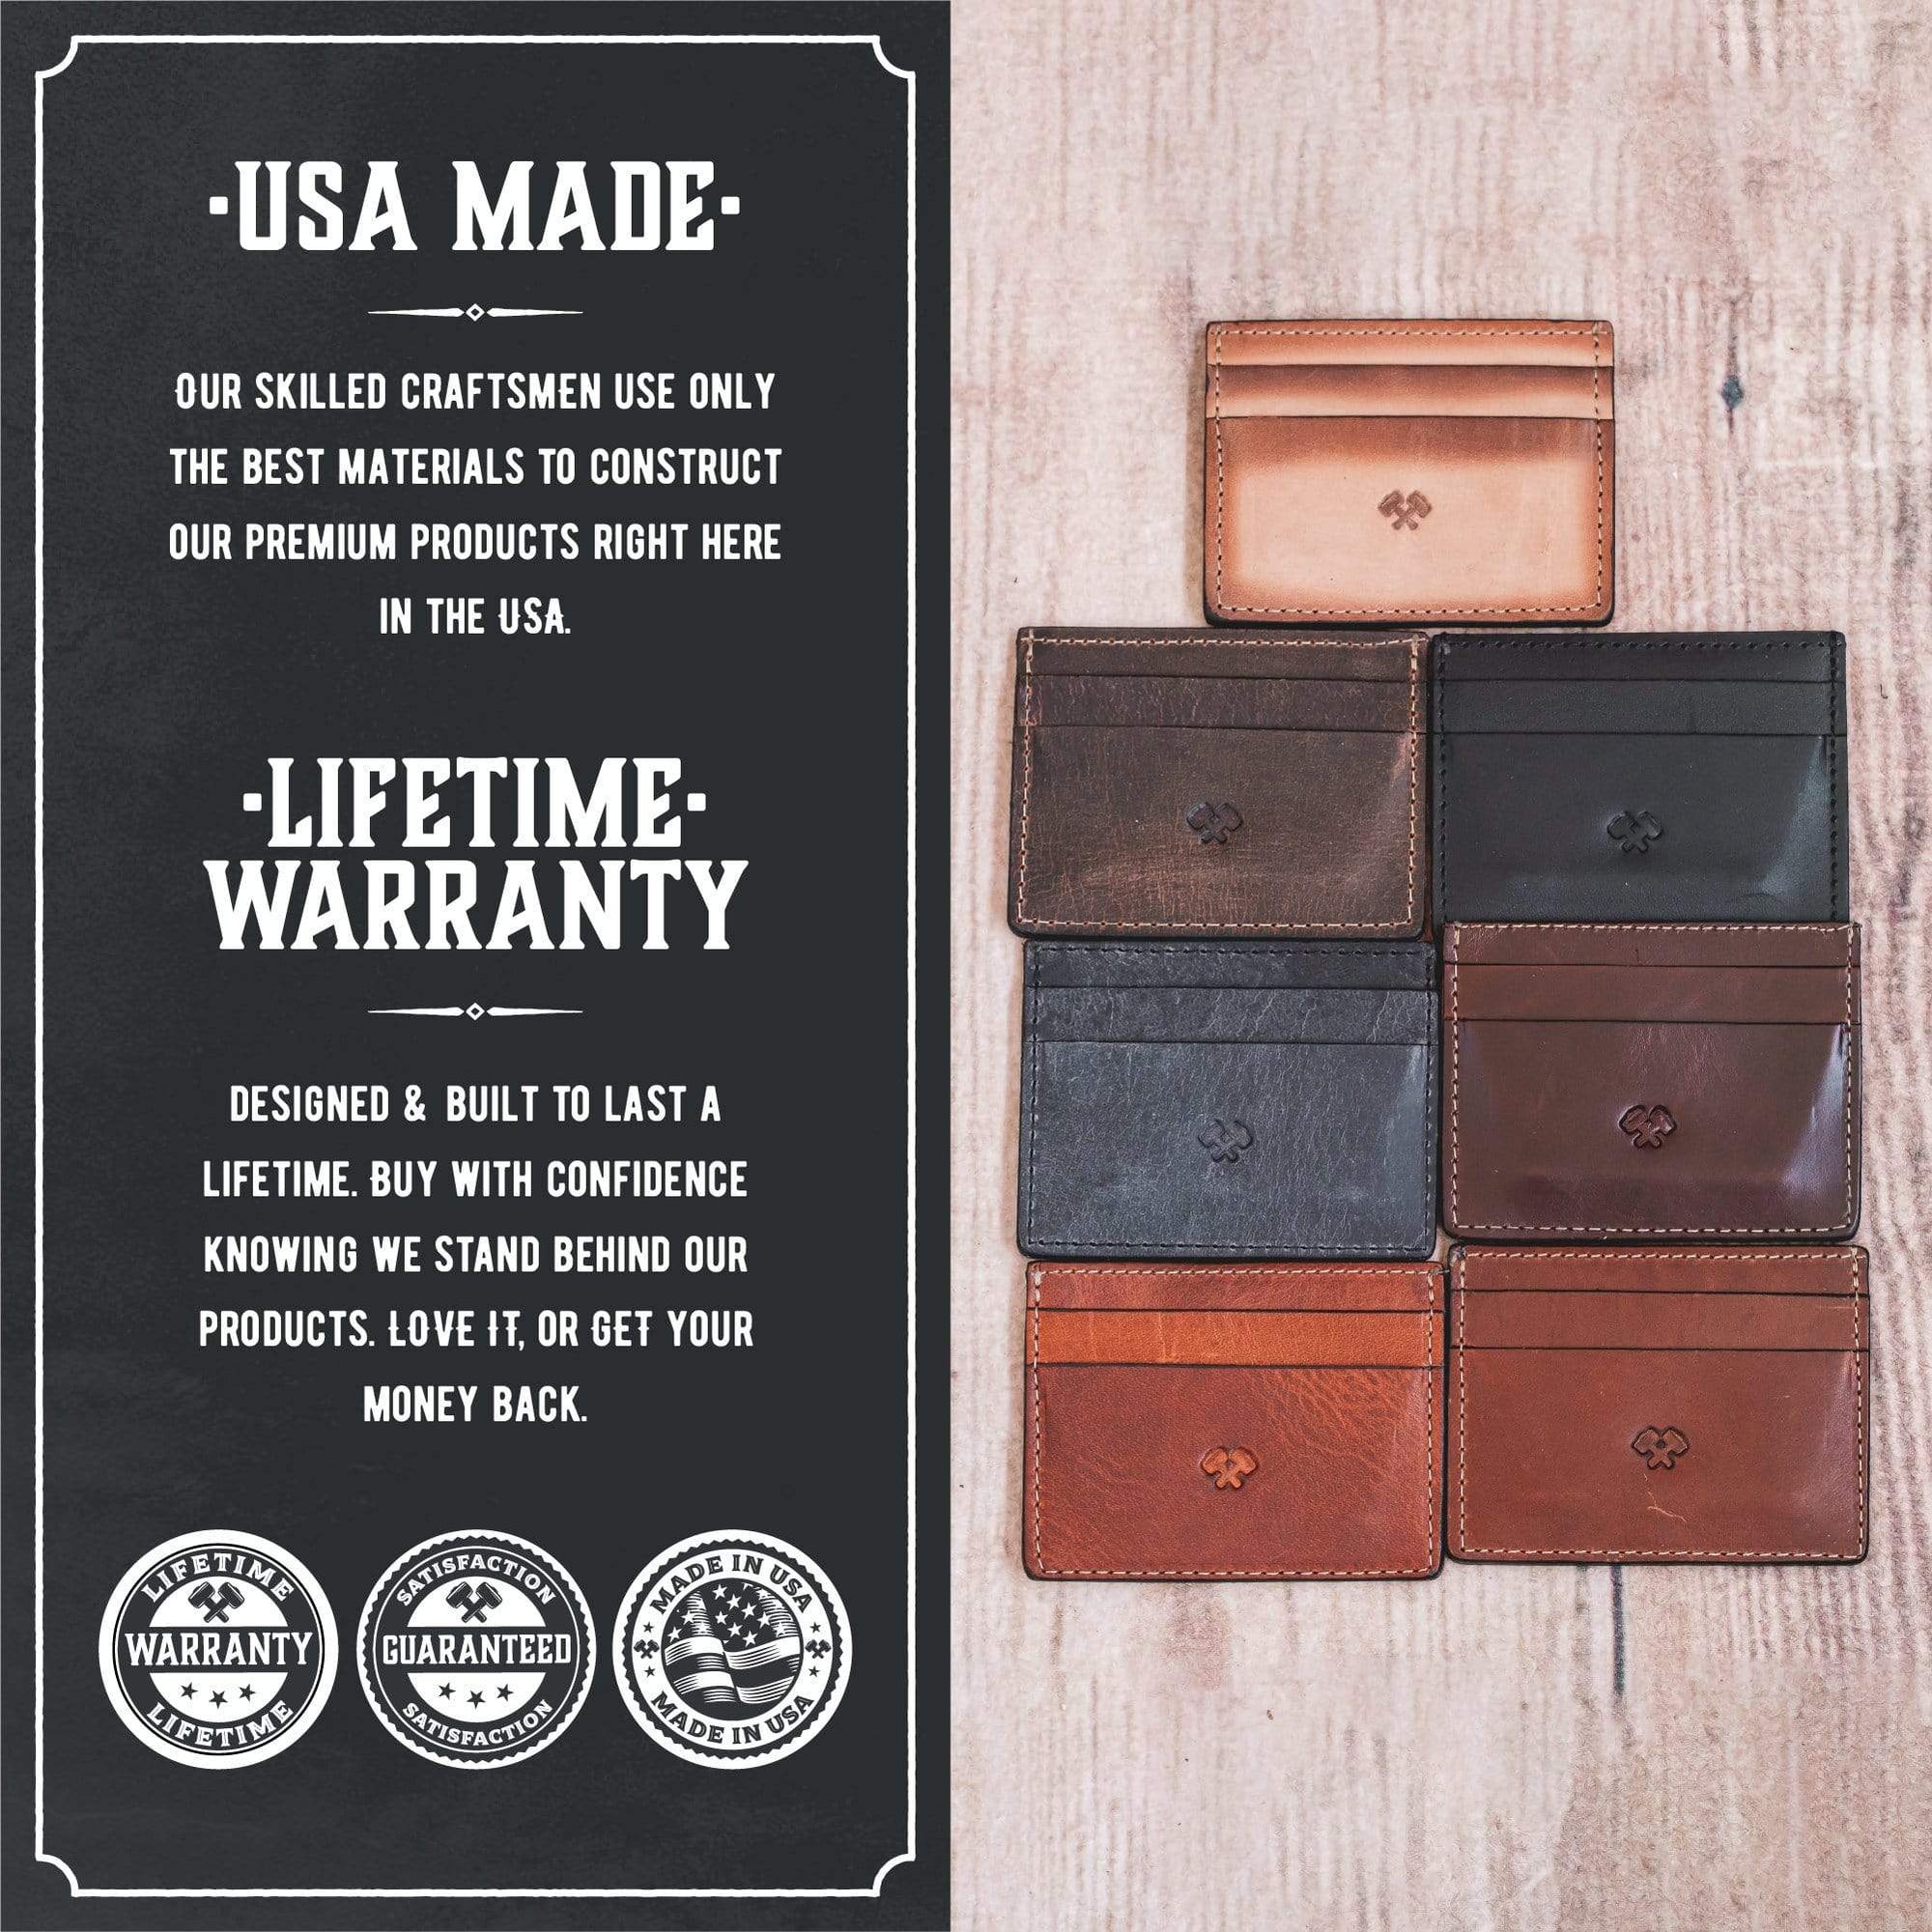 Main Street Forge Front Pocket Slim Bifold Wallet for Men | Made in USA | Premium Full Grain Leather Men?s Wallet with Minimalist Design | Chocolate